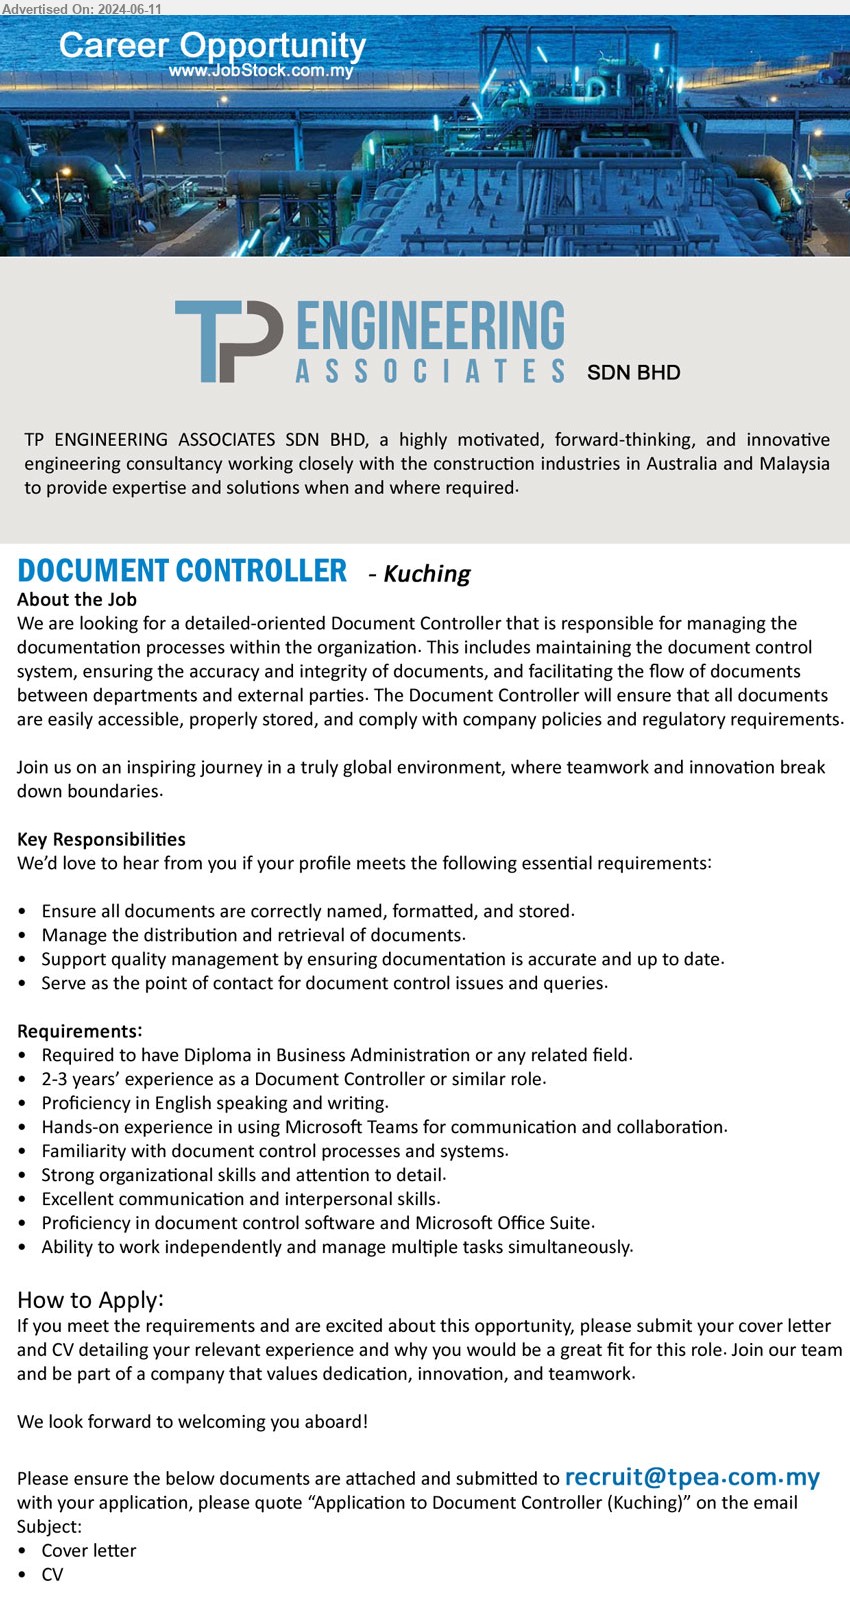 TP ENGINEERING ASSOCIATES SDN BHD - DOCUMENT CONTROLLER (Kuching), Diploma in Business Administration, 2-3 years’ experience as a Document Controller or similar role, Proficiency in English speaking and writing.,...
Email resume to ...